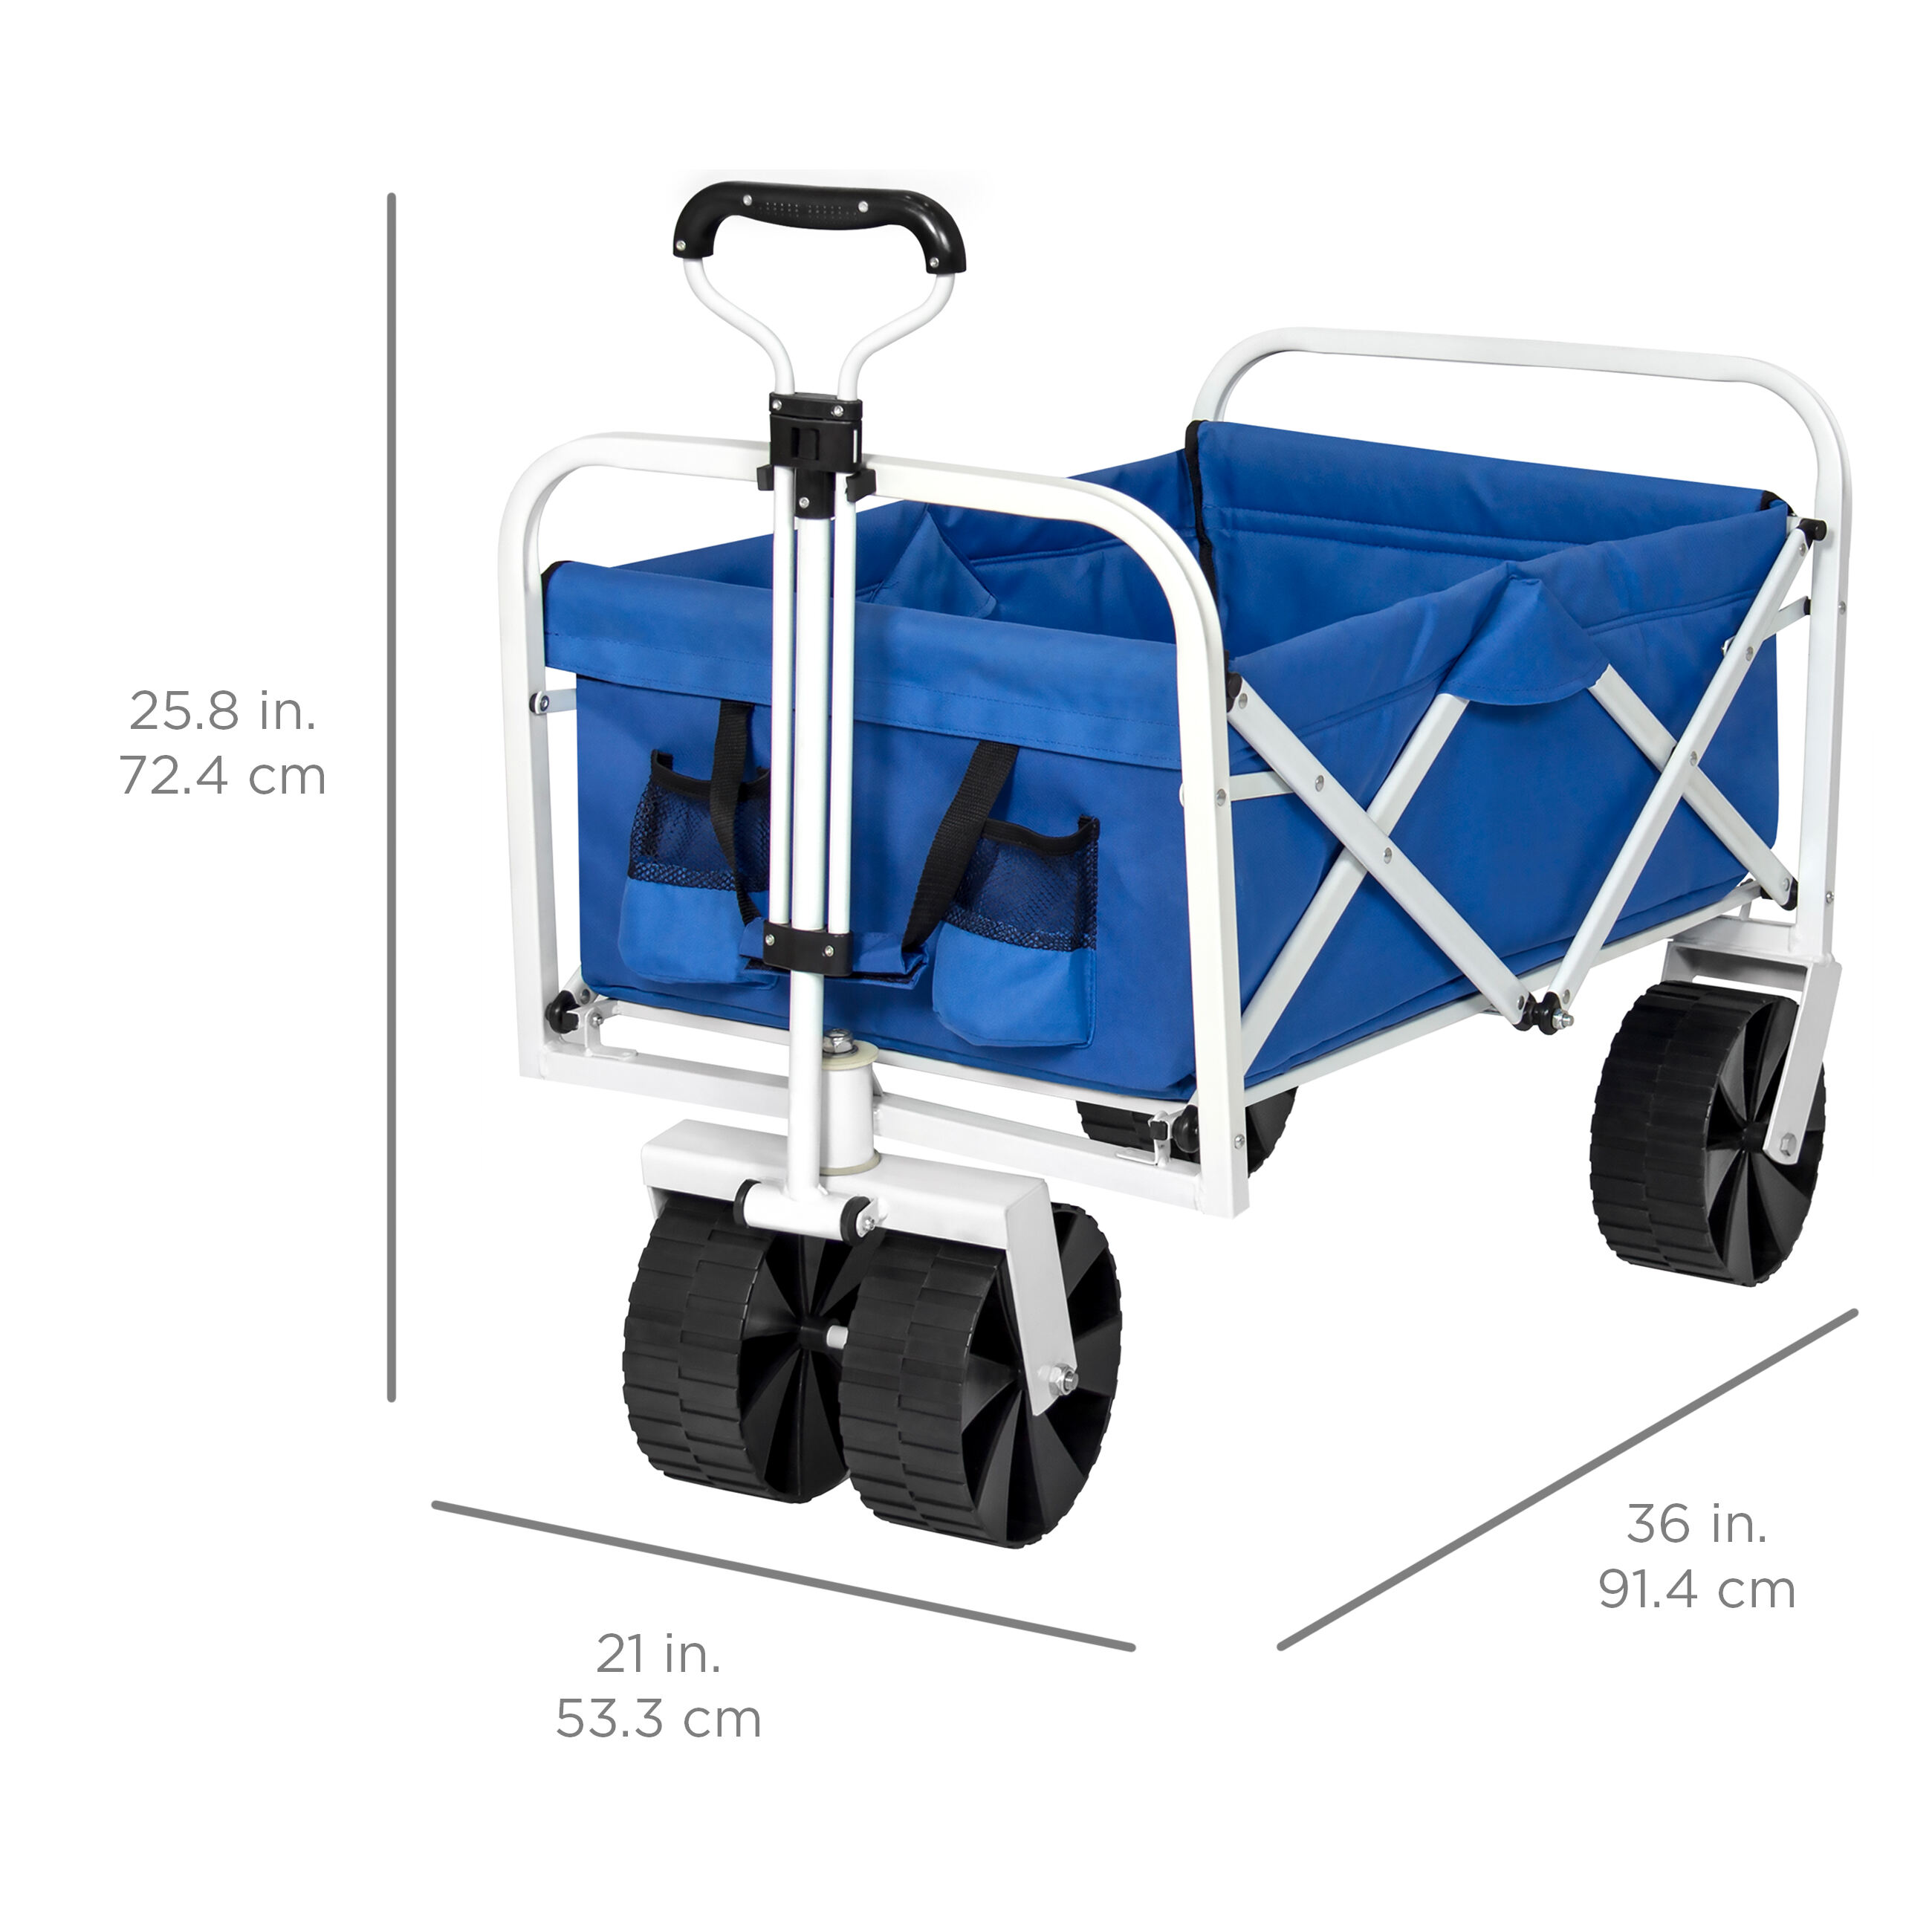 GT1806 Collapsible Folding Wagon, Beach Wagon Cart, with Big Wheels for Camping Garden Sports supplier